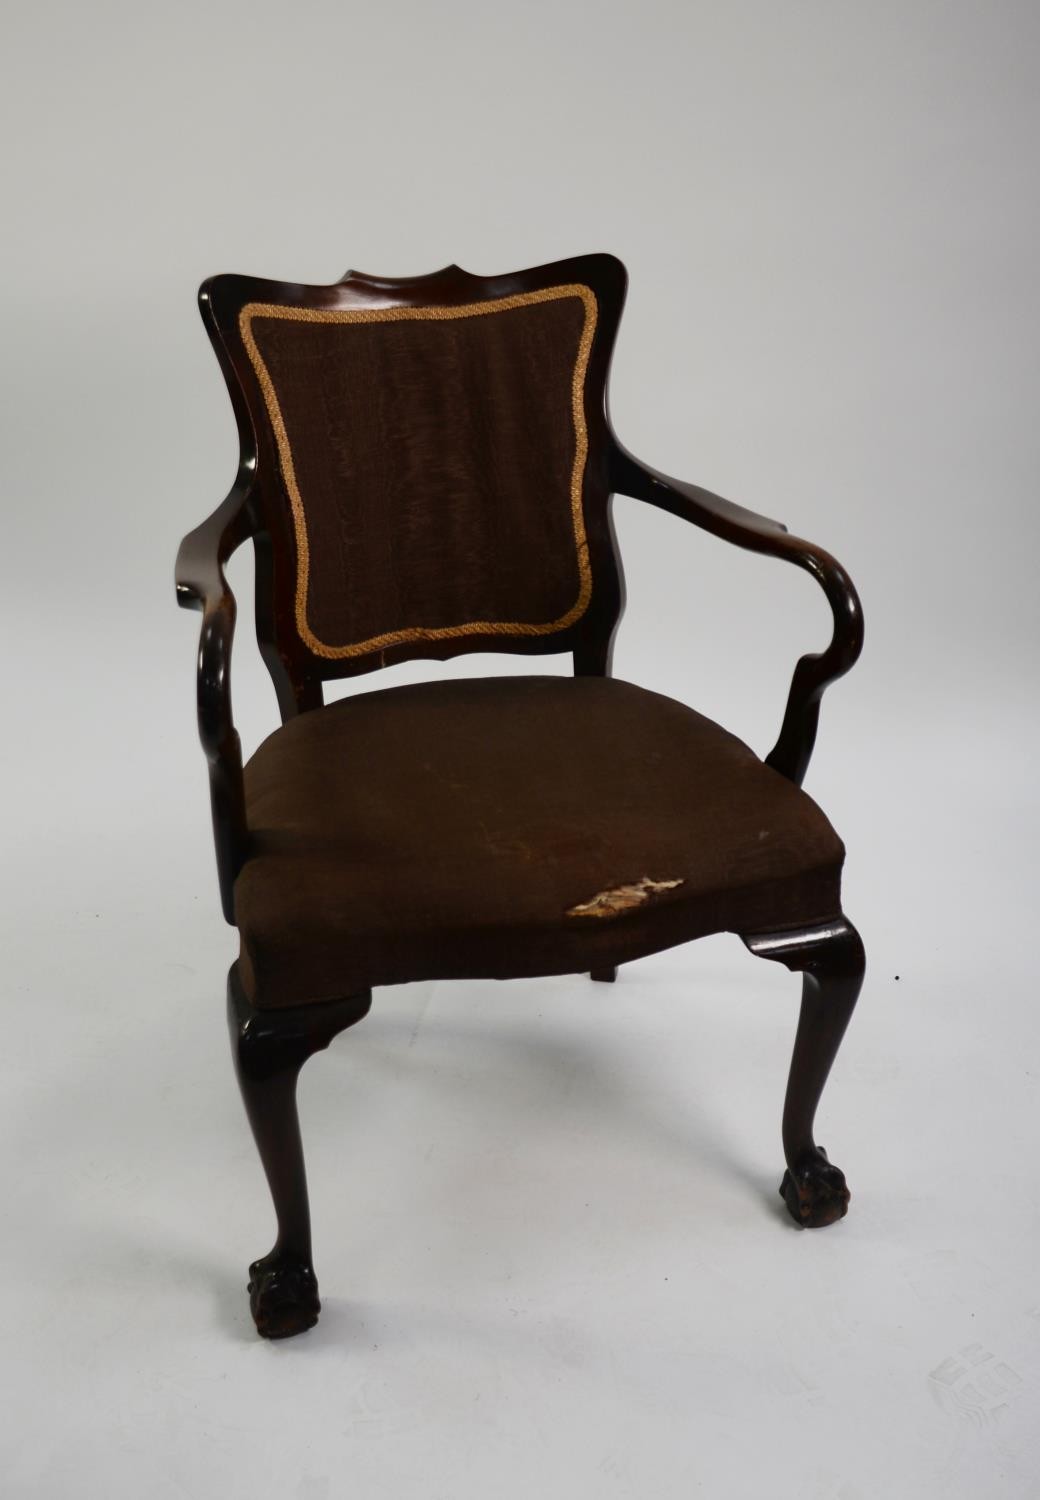 TWENTIETH CENTURY GEORGIAN STYLE MAHOGANY CARVER DINING CHAIR, with padded back and stuff over